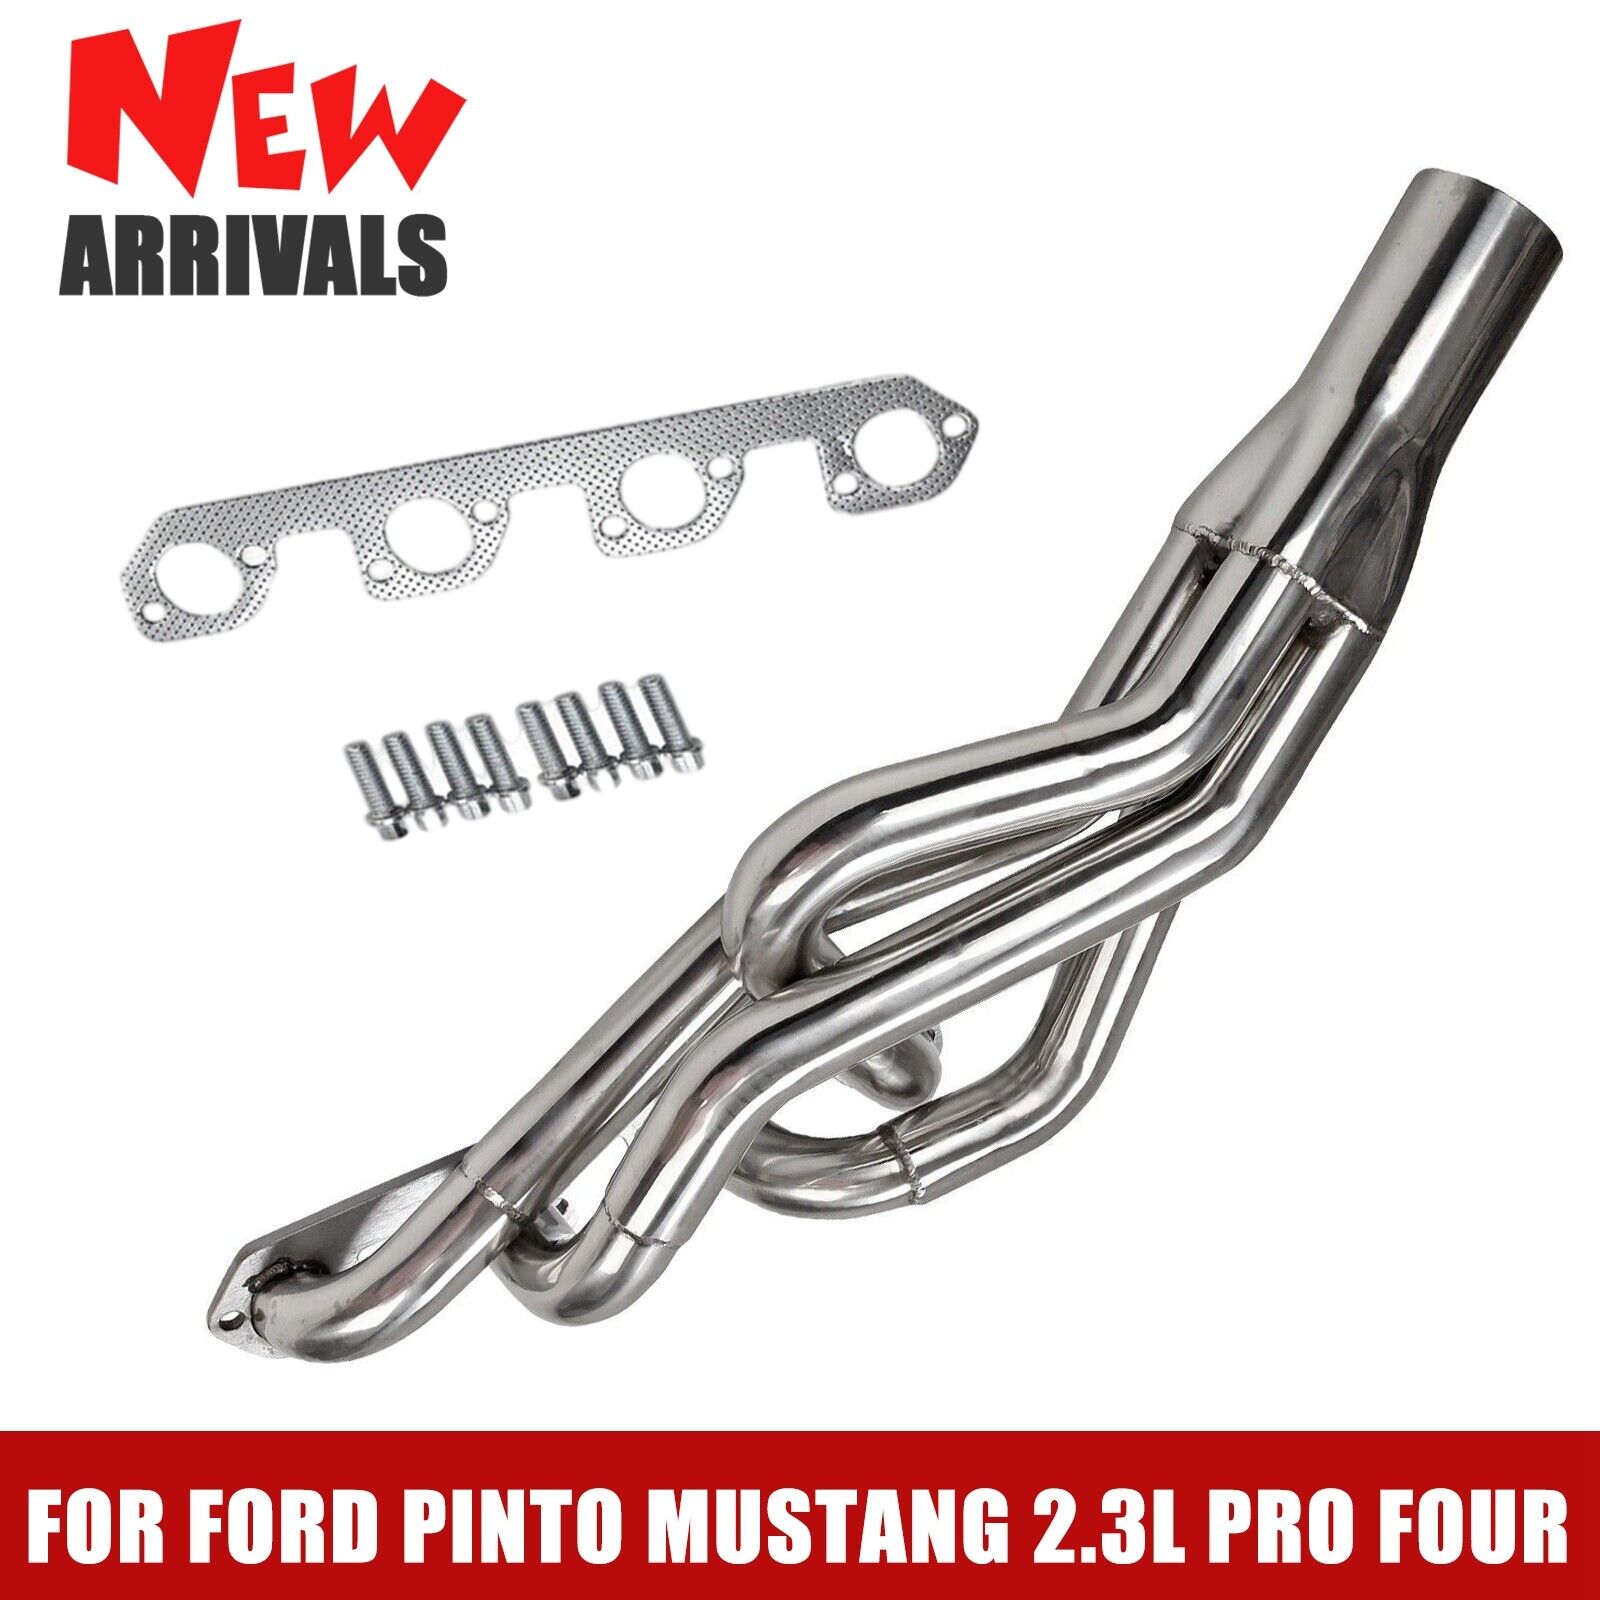 Stainless Steel Manifold Headers For 74-80 Ford Pinto 82-92 Ranger 2.3L Pro US